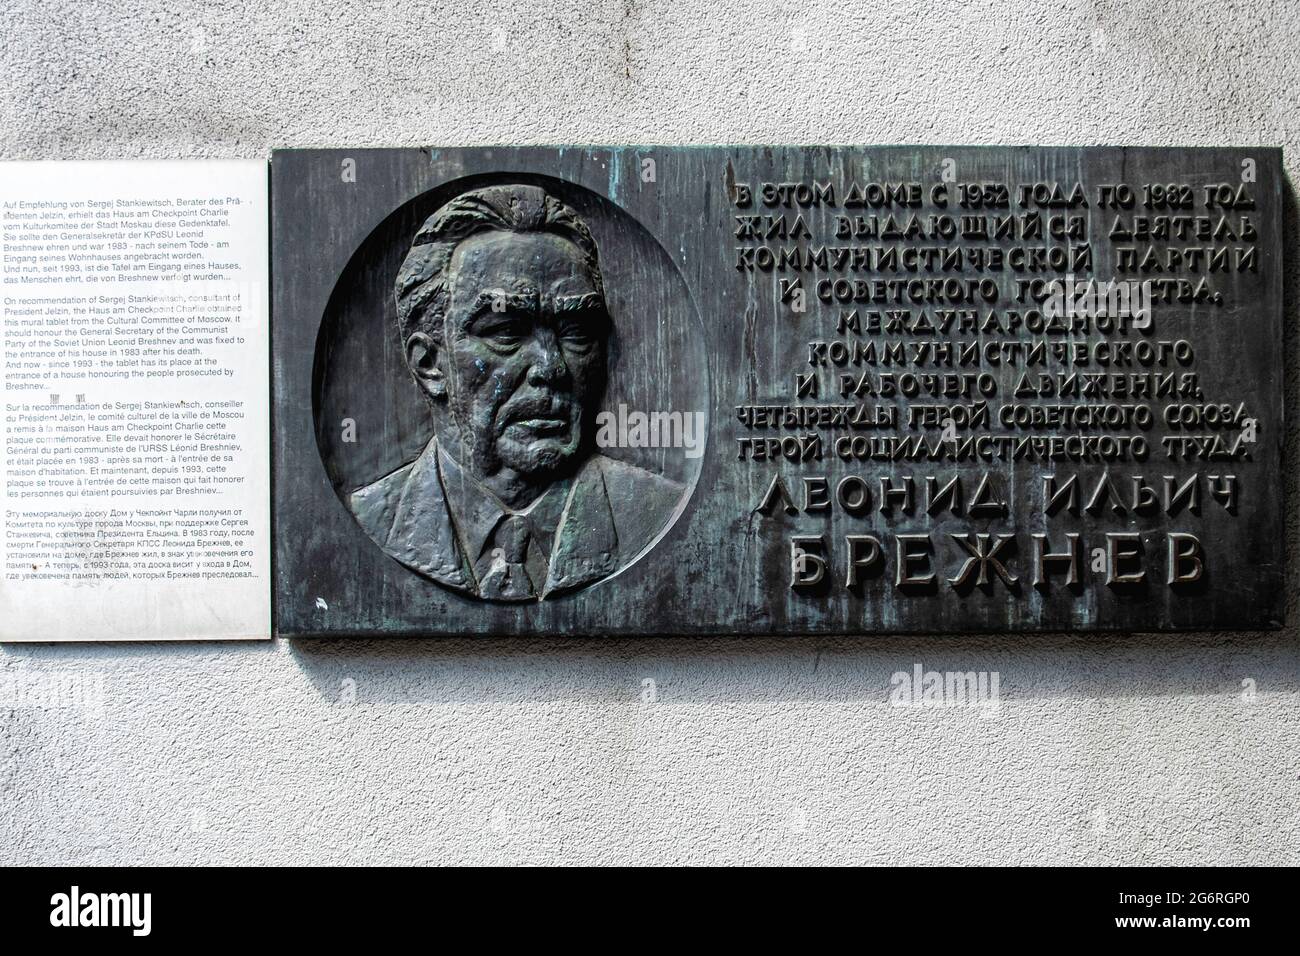 Leonid Breshev Bronze Plaque outside Checkpoint Charlie Museum in Mitte, Berlin, Germany Stock Photo